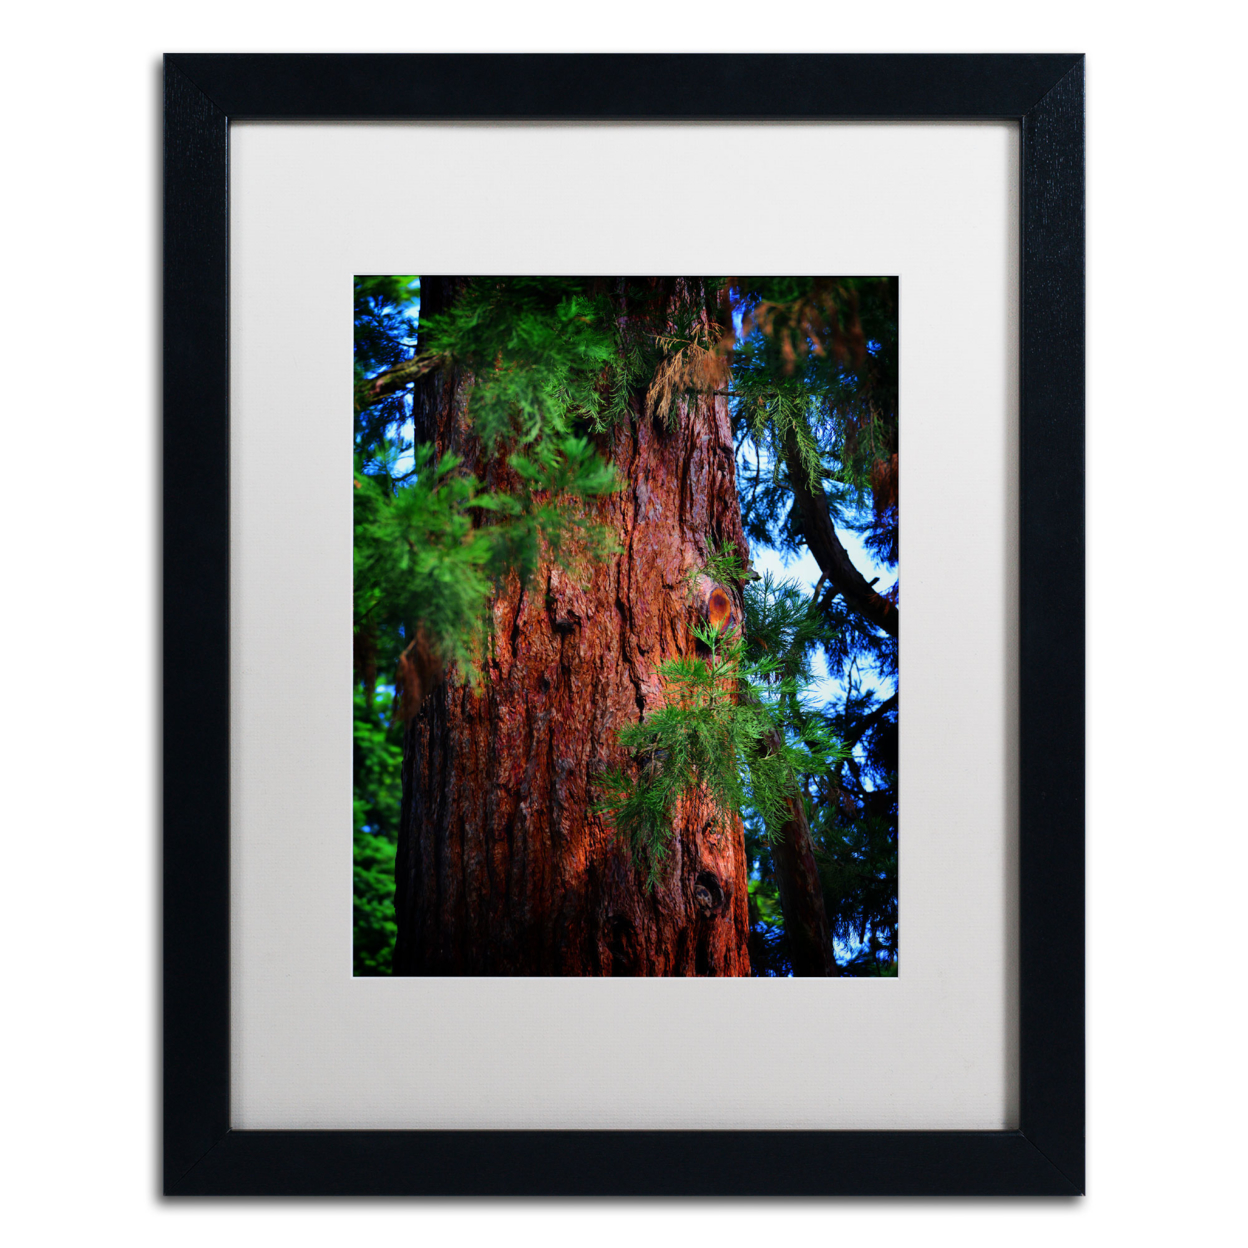 Philippe Sainte-Laudy 'Giant Sequoia' Black Wooden Framed Art 18 X 22 Inches